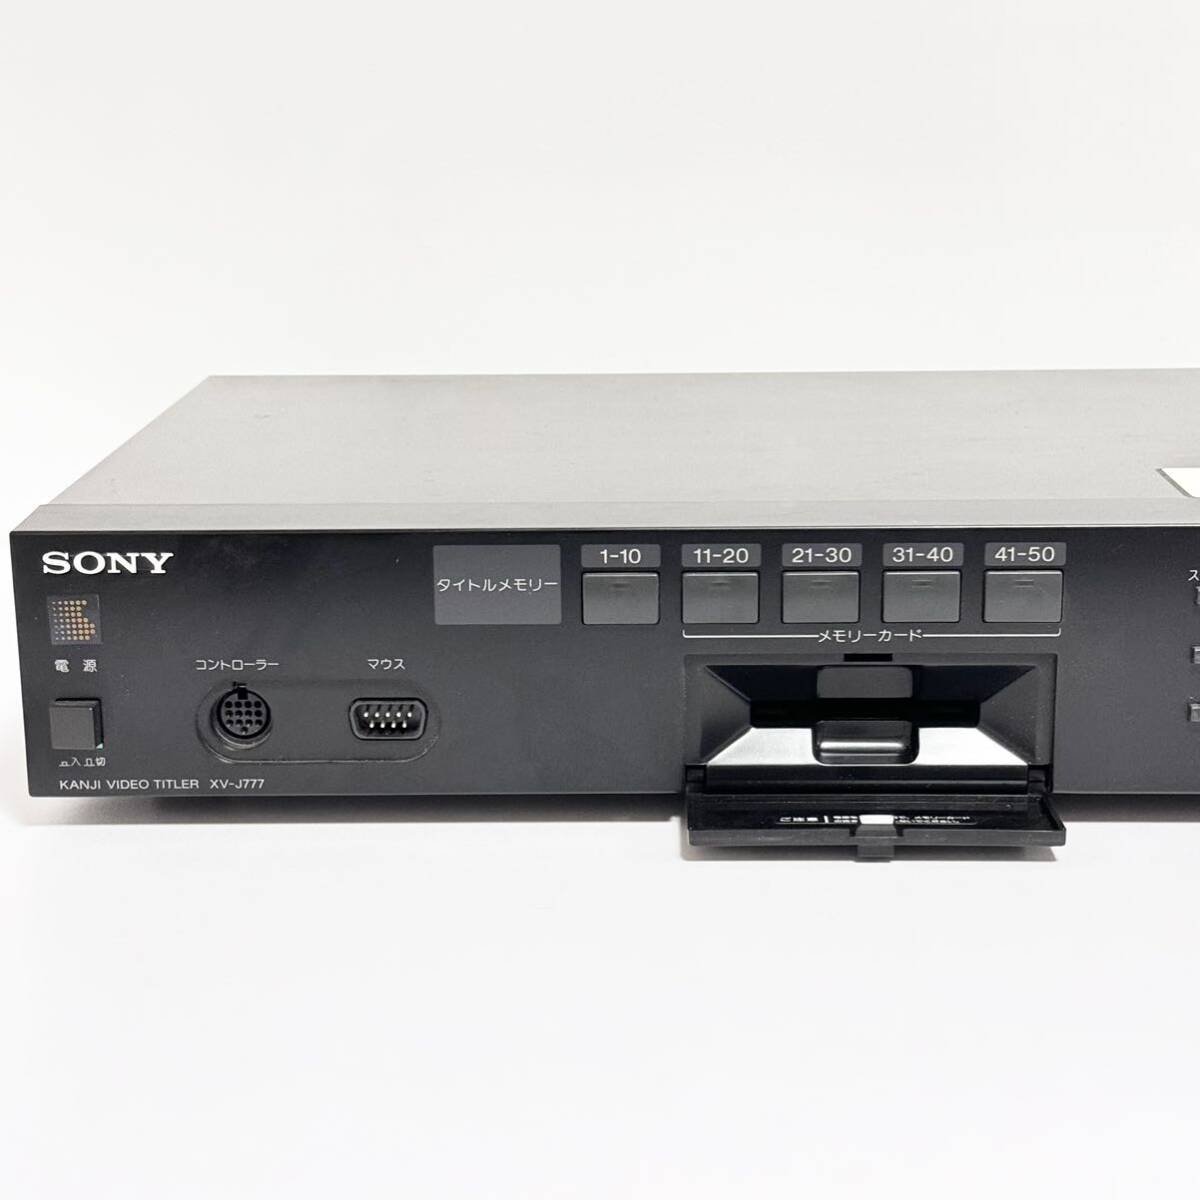 SONY Chinese character video titler XV-J777